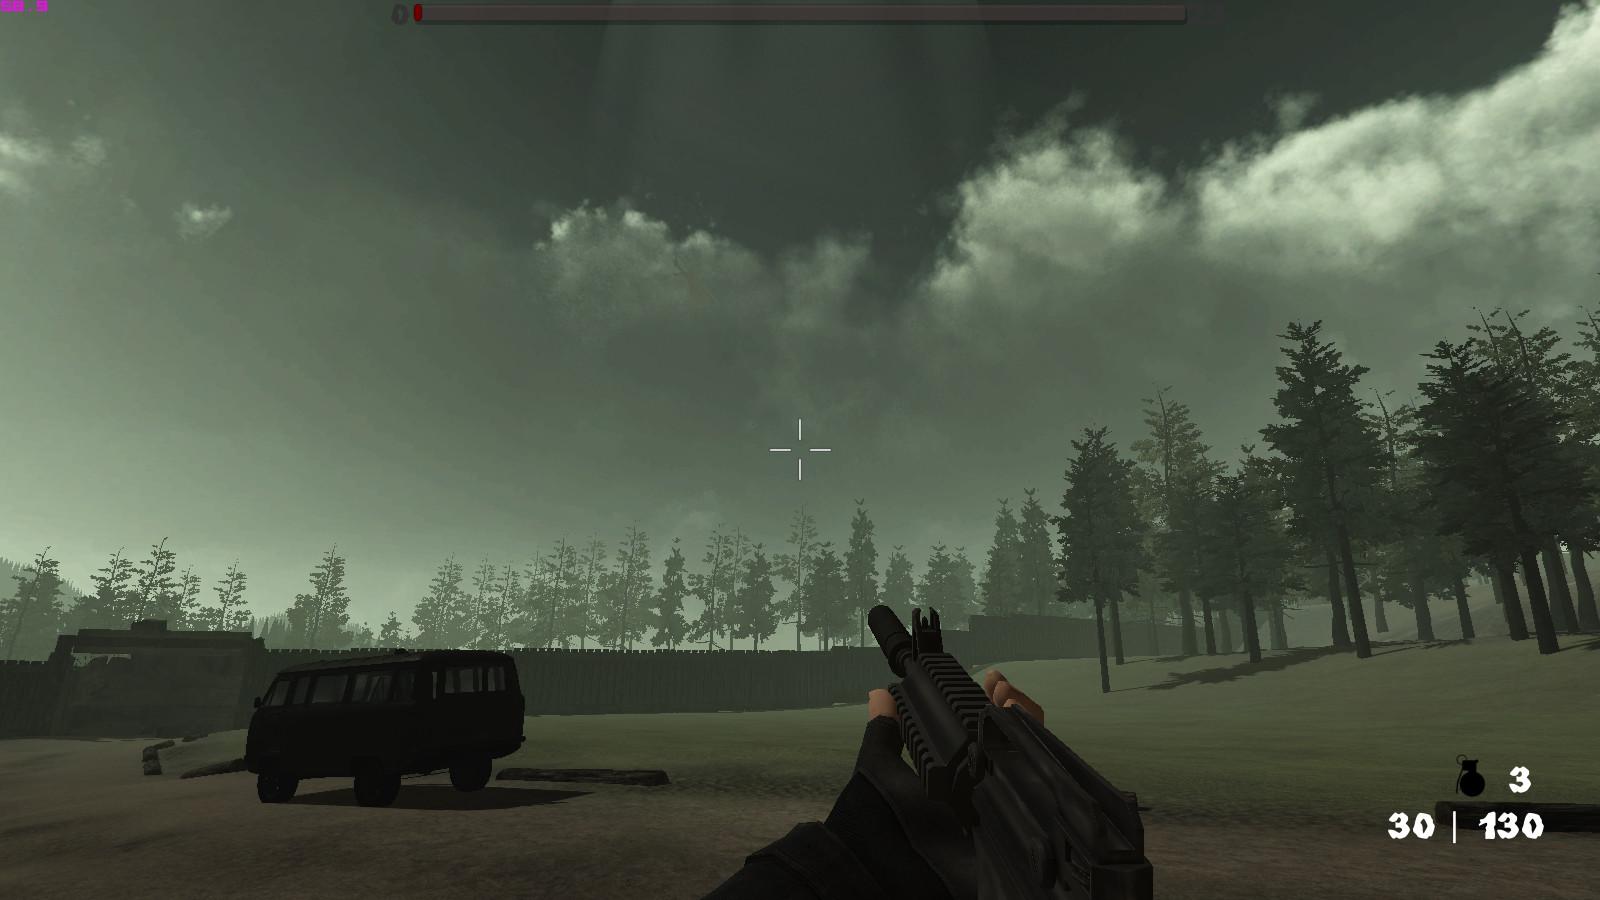 Screenshot №7 from game CONTRACTED